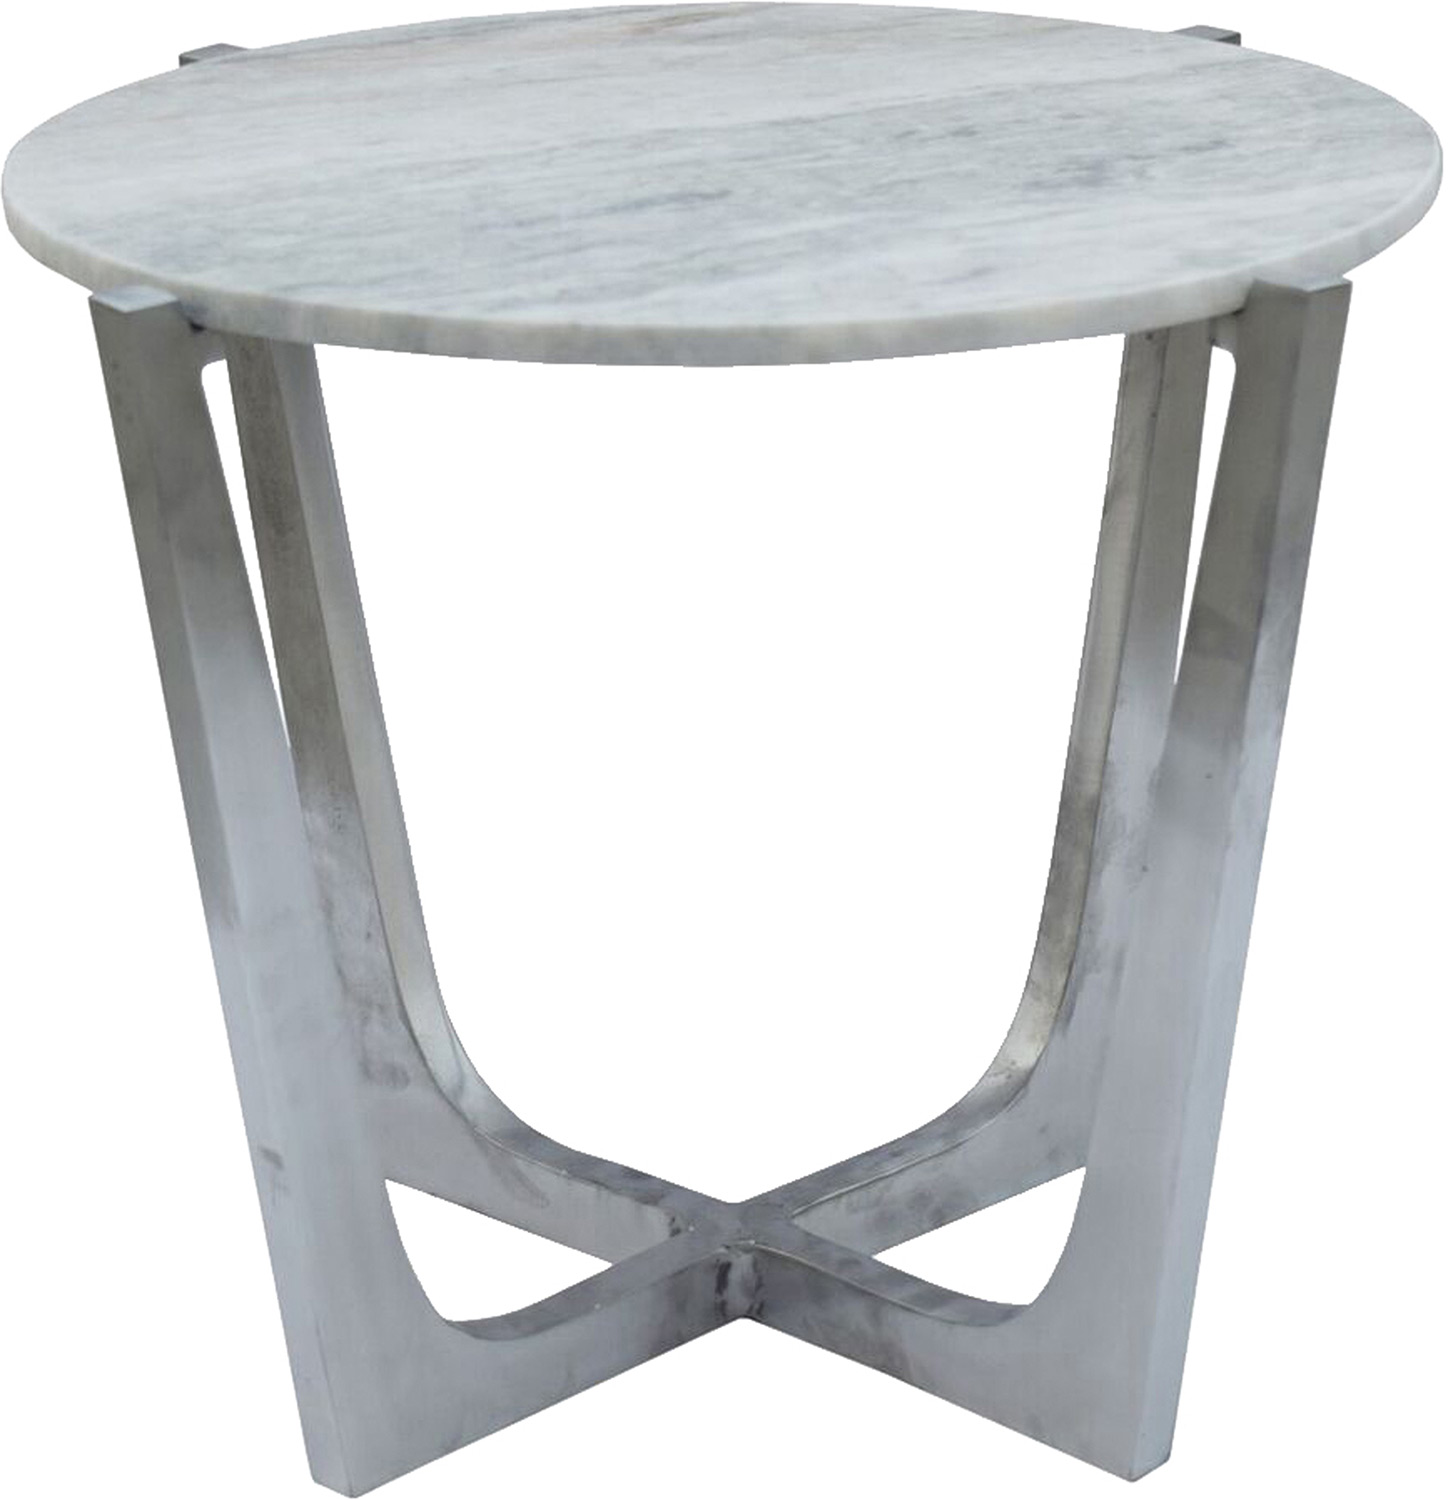 Ren-Wil Dayton Accent Table - Brushed Chrome